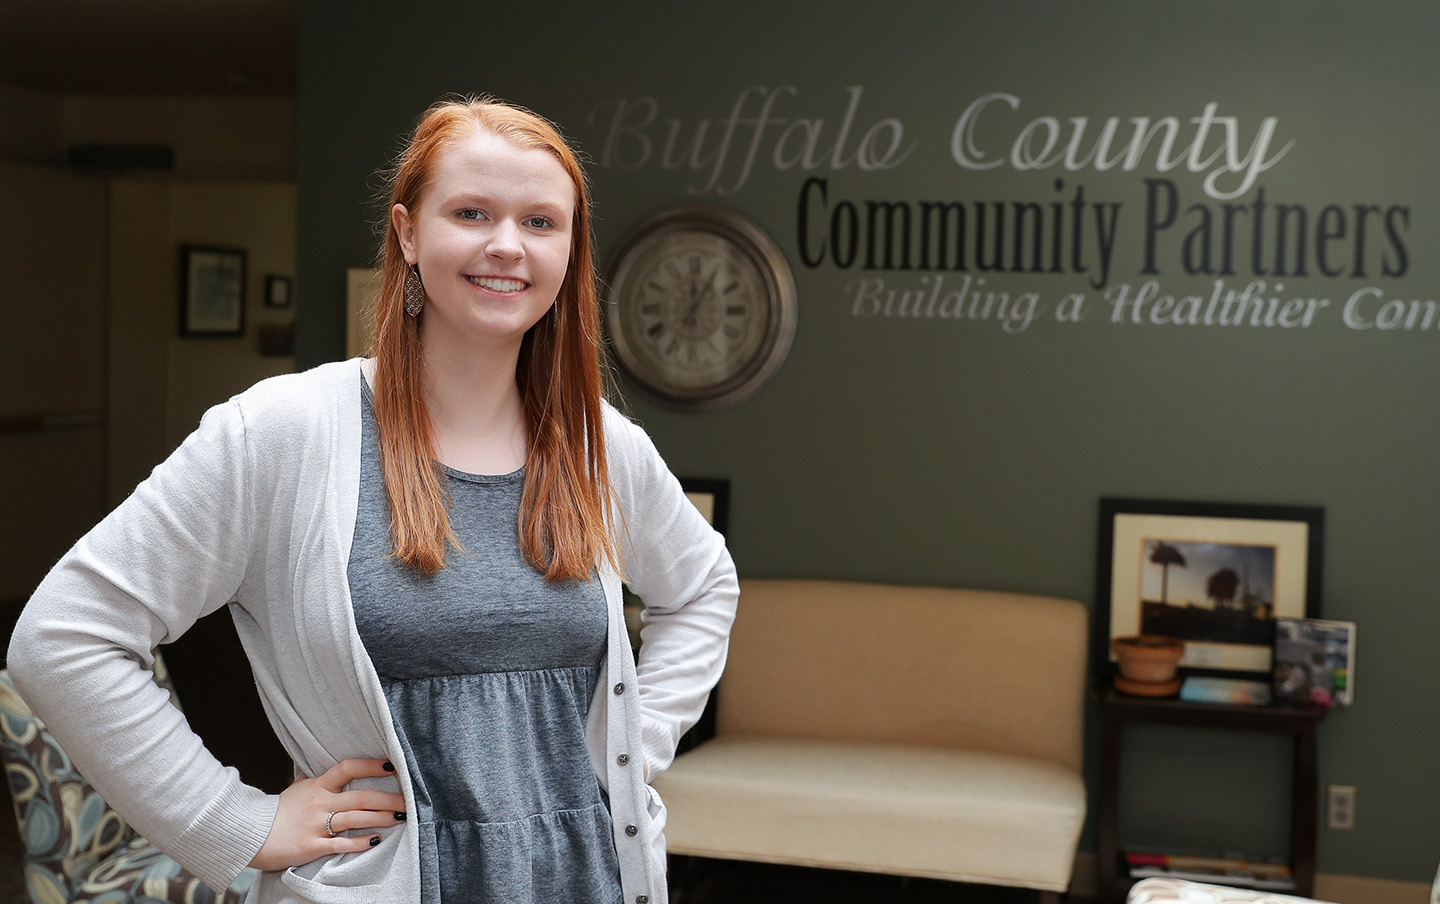 Jacque Platt worked as a community response assistant at Buffalo County Community Partners, helping people access food, rent, utility and medical bill assistance, as well as mental health counseling.